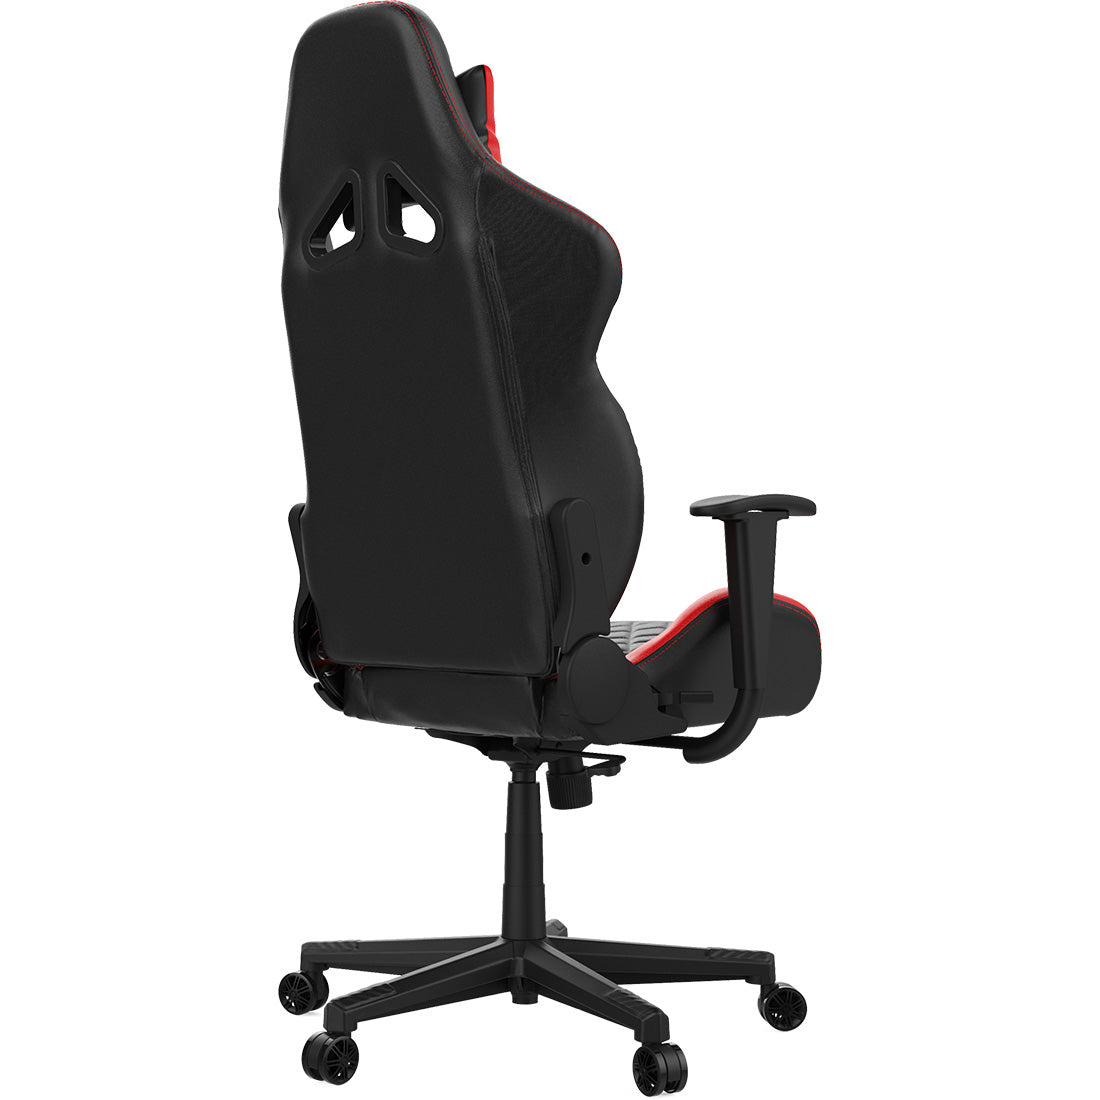 Gamdias ZELUS E1 L Gaming Chair with 135° Adjustable Backrest and Nylon Base